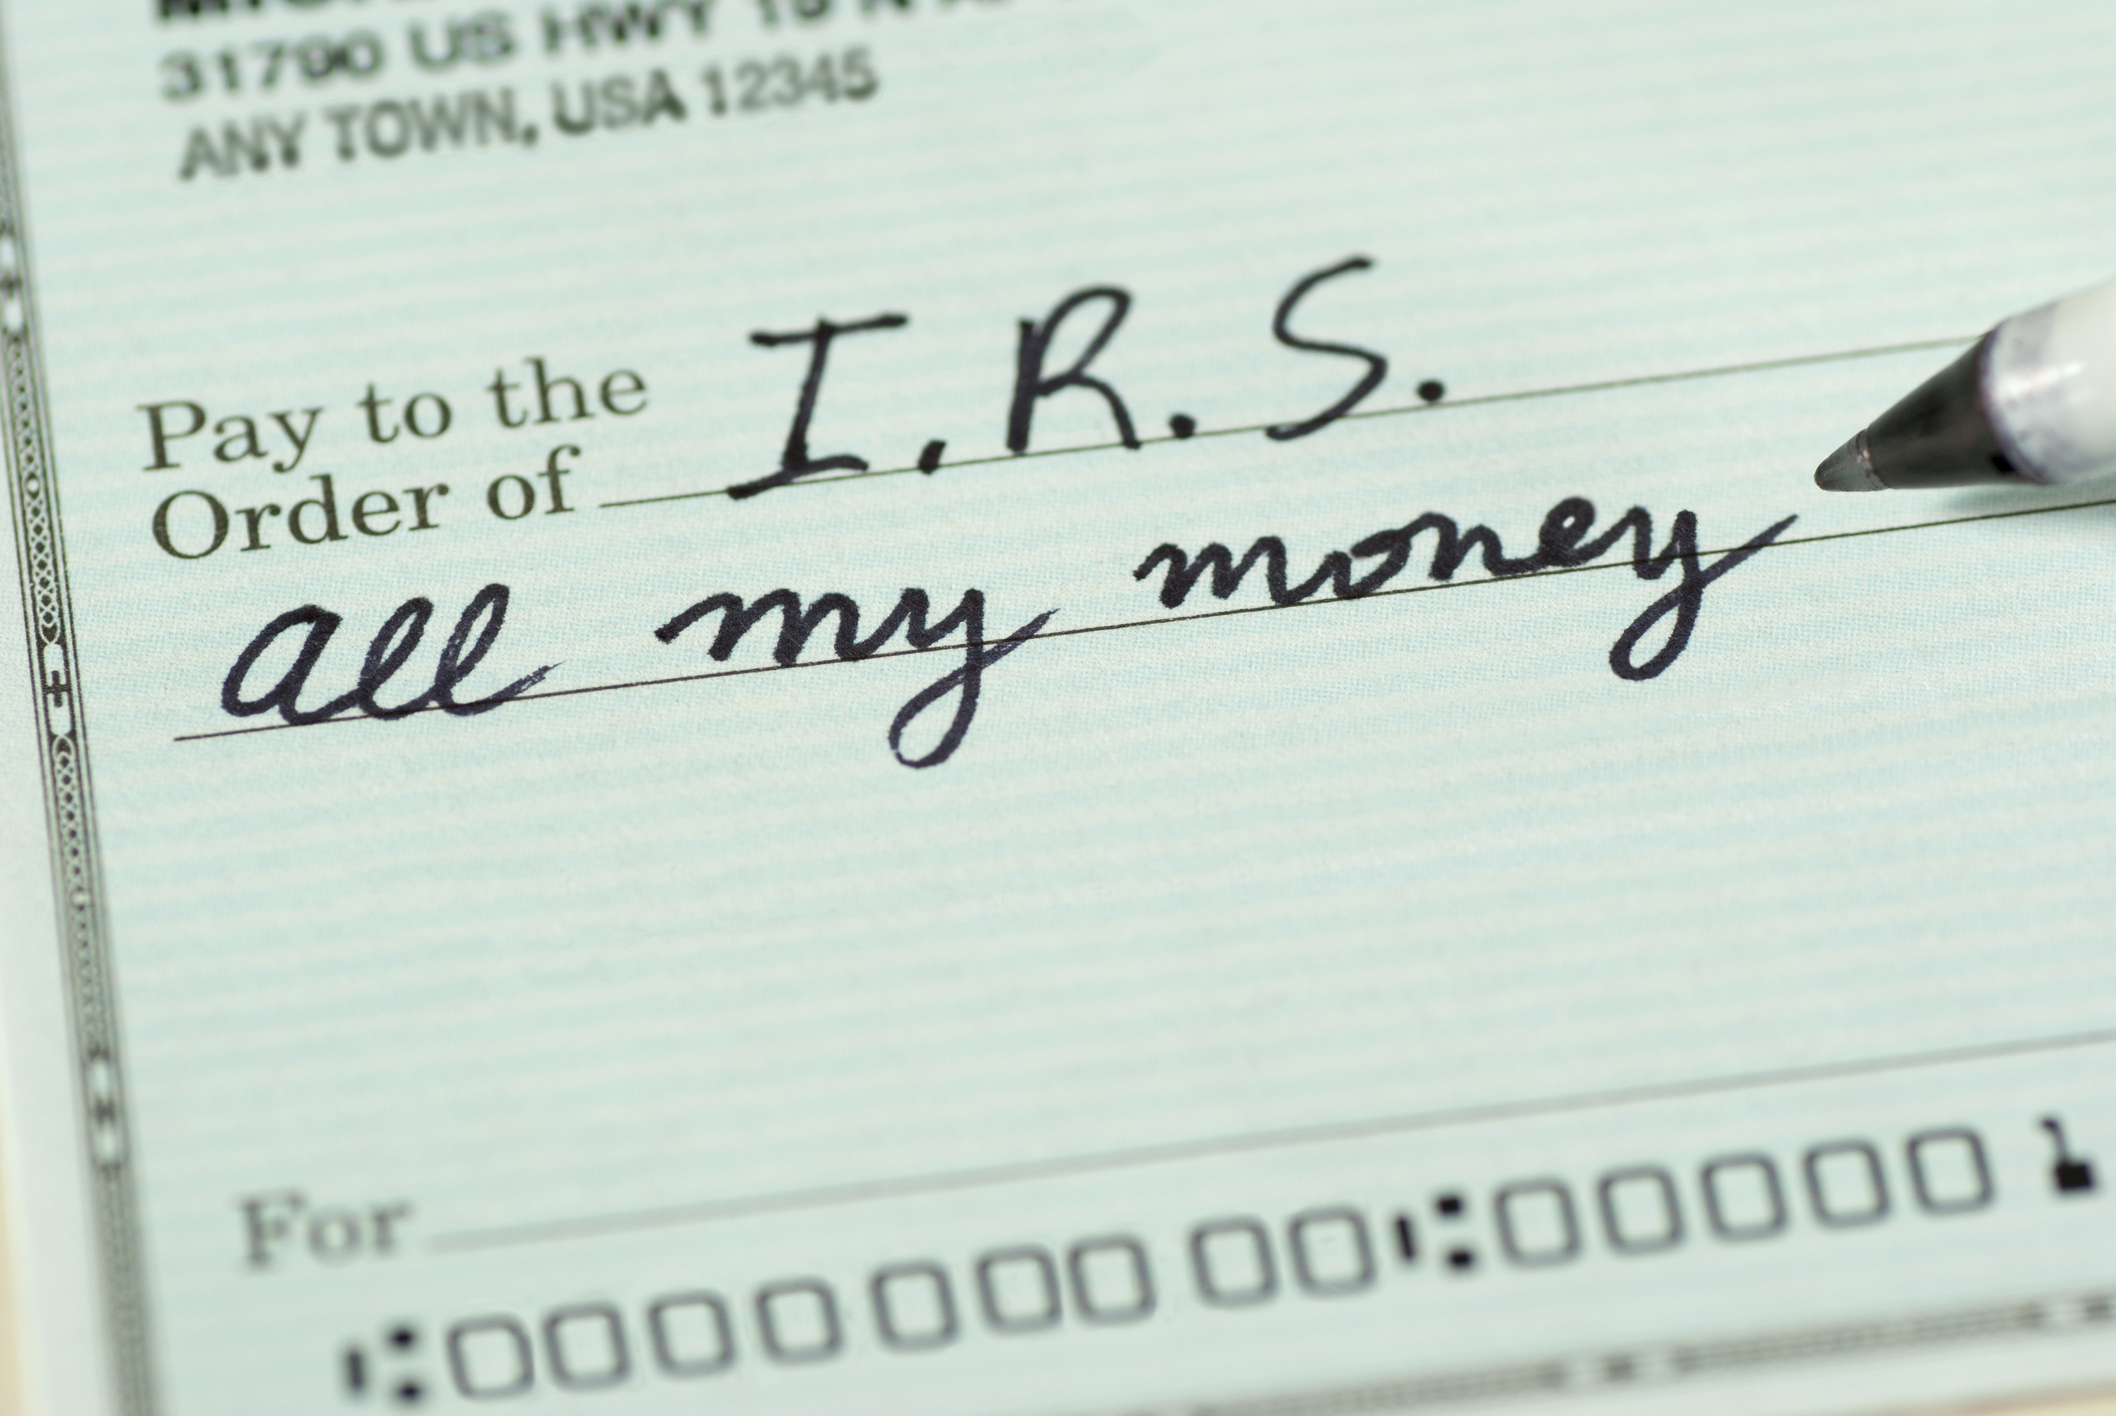 Humorous picture of a check addressed to the IRS